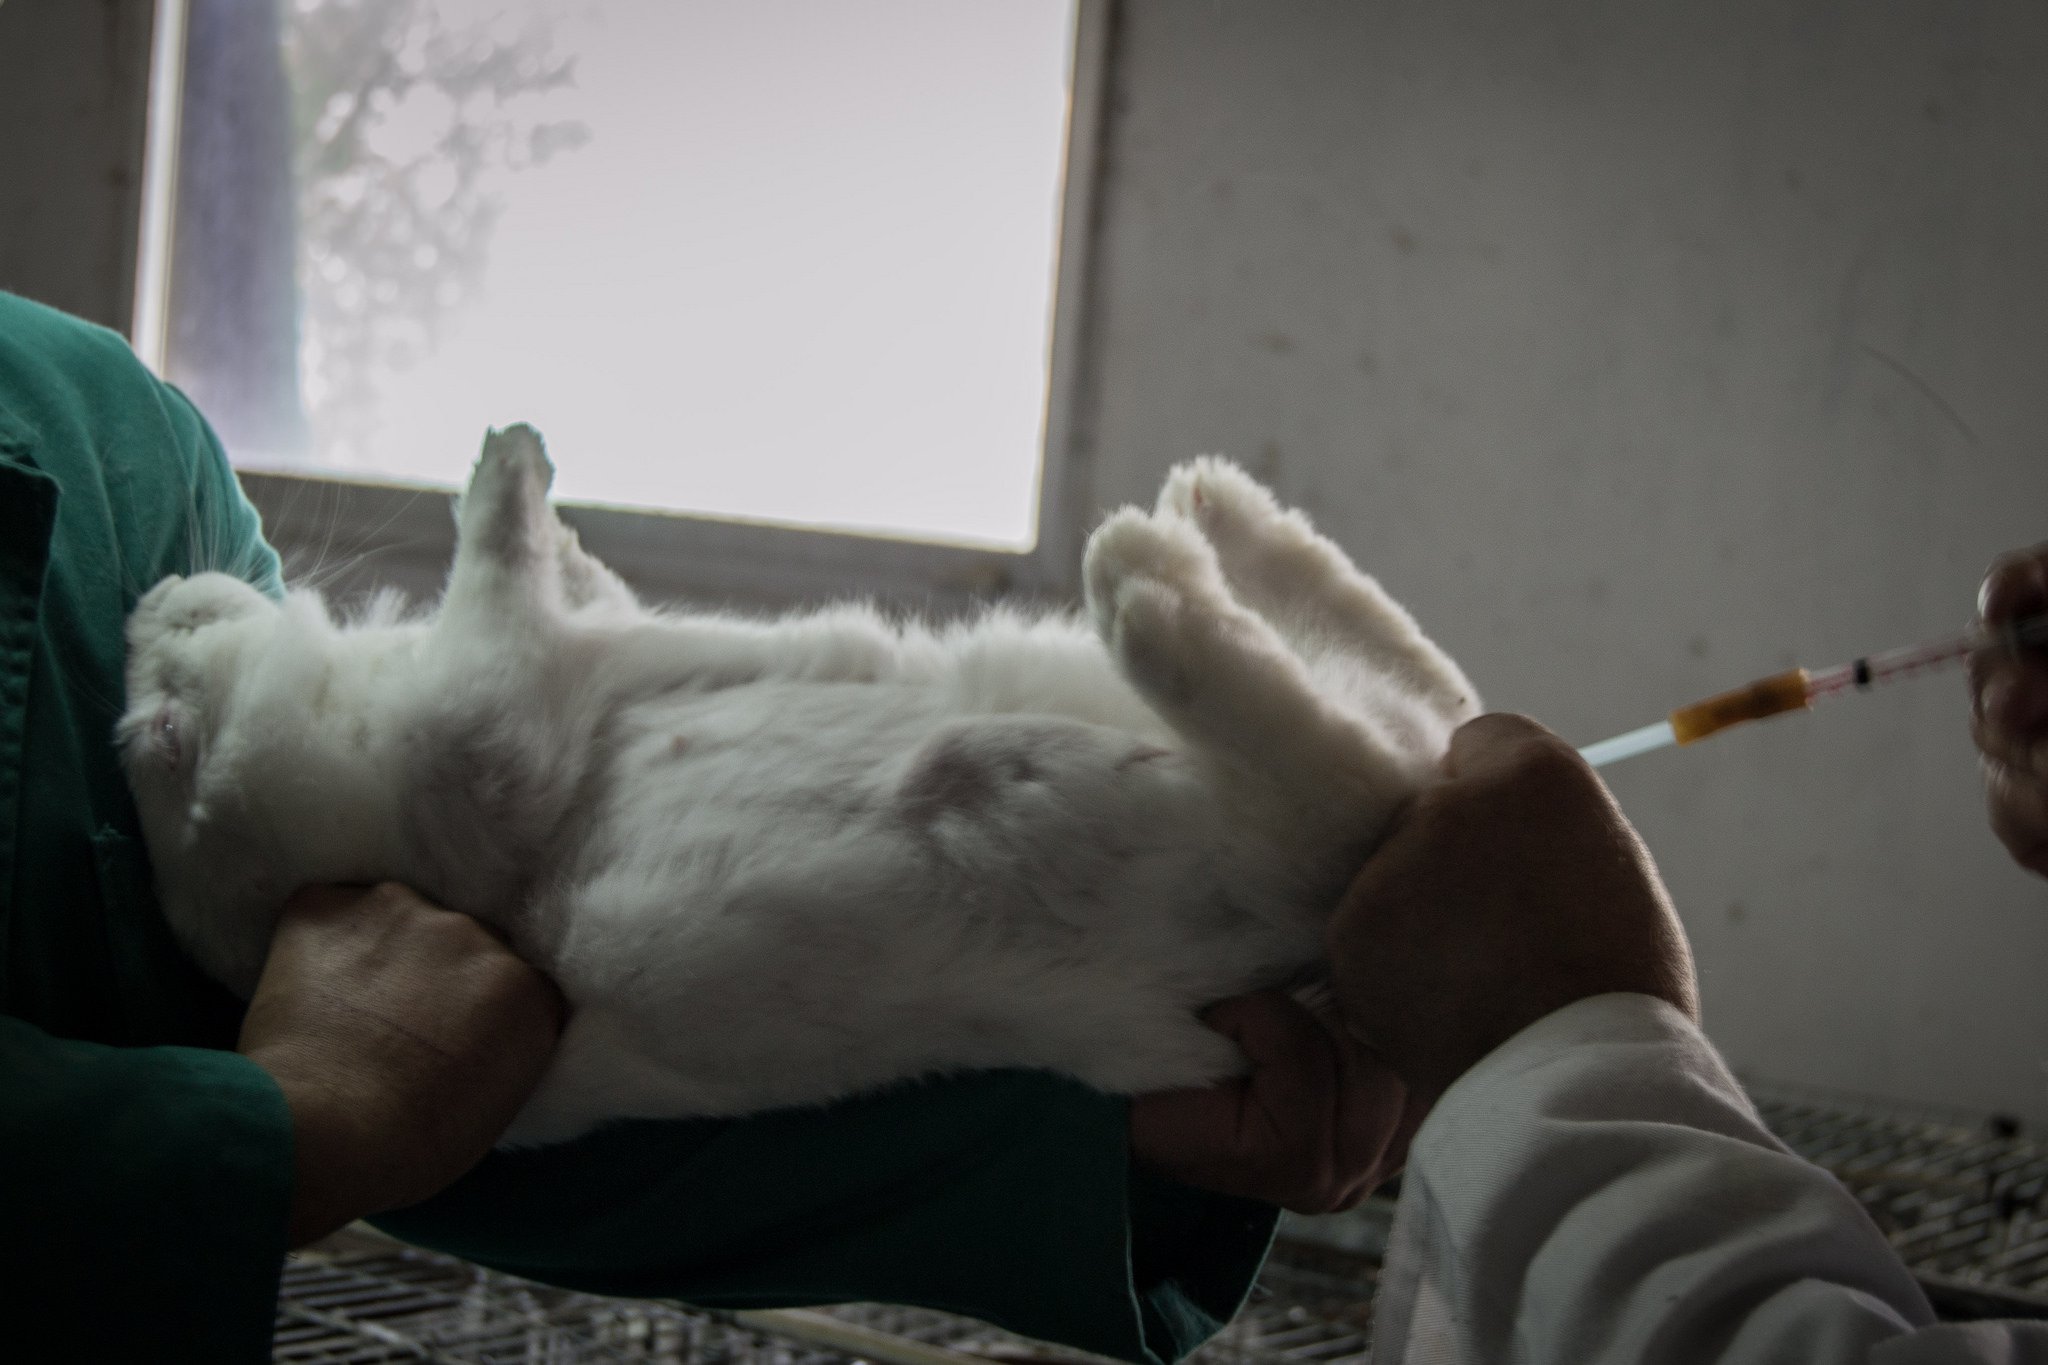 A rabbit being injected